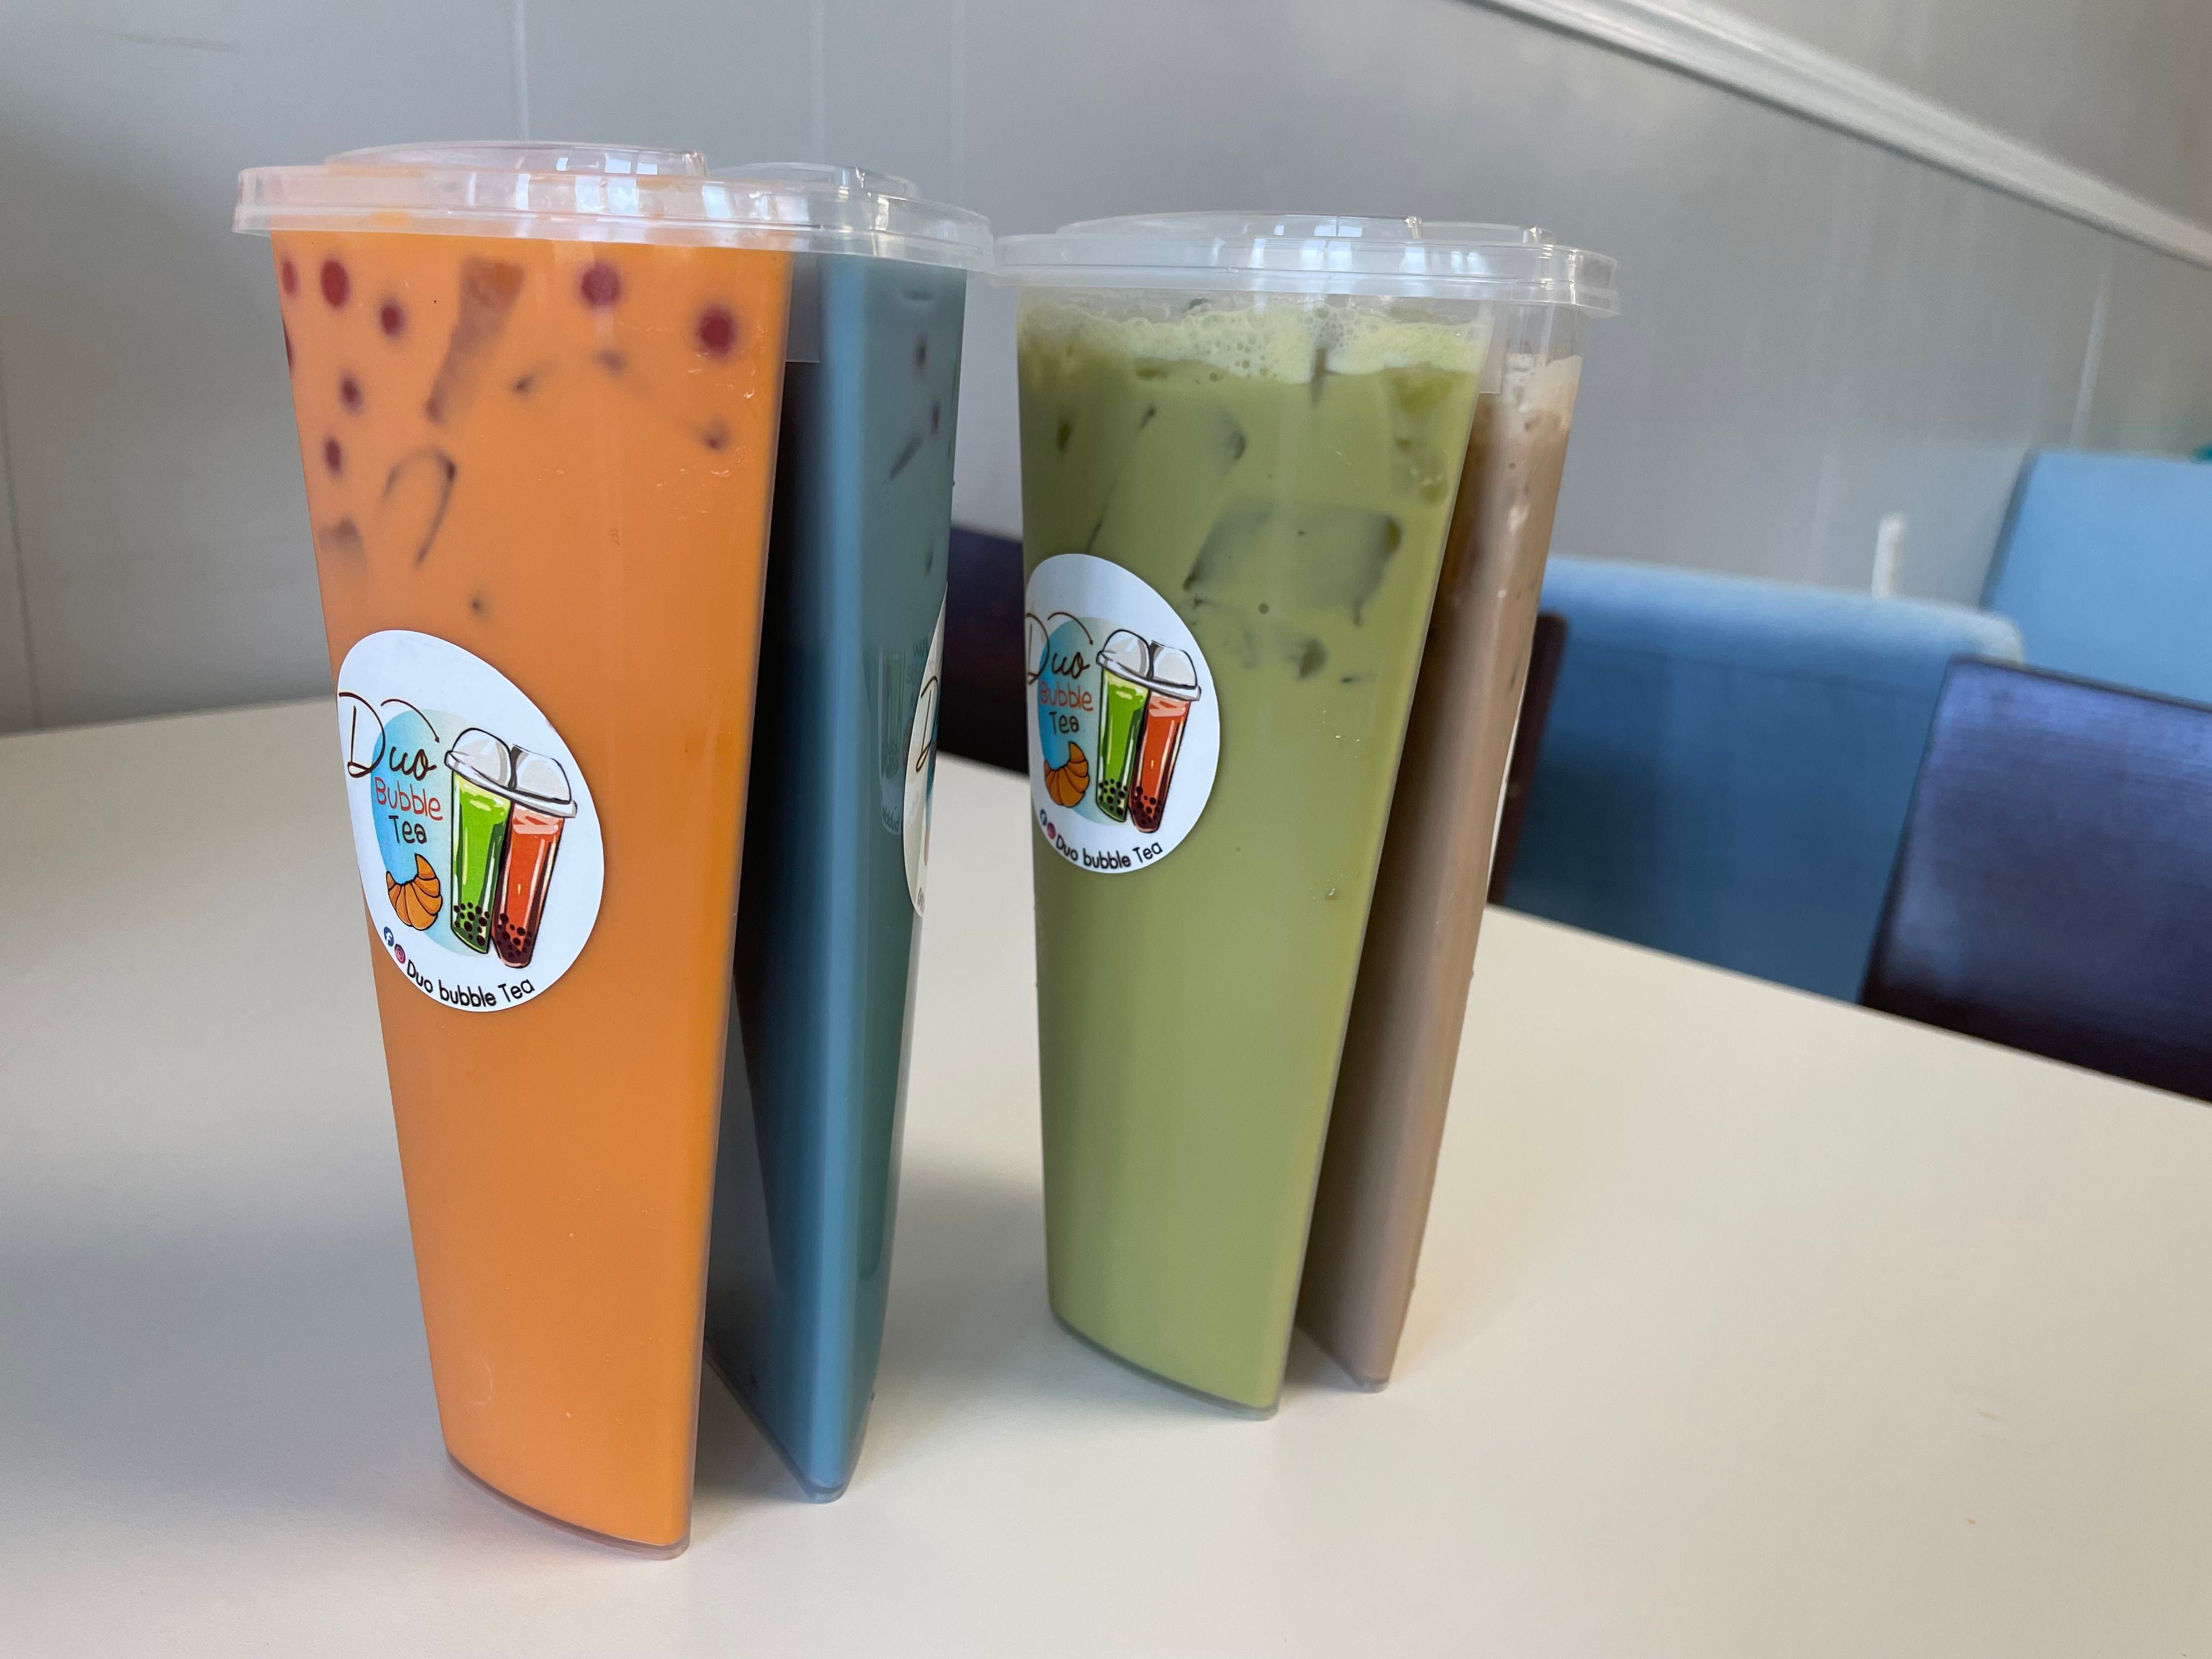 New bubble tea shop featuring duo cups opens in Huber Heights